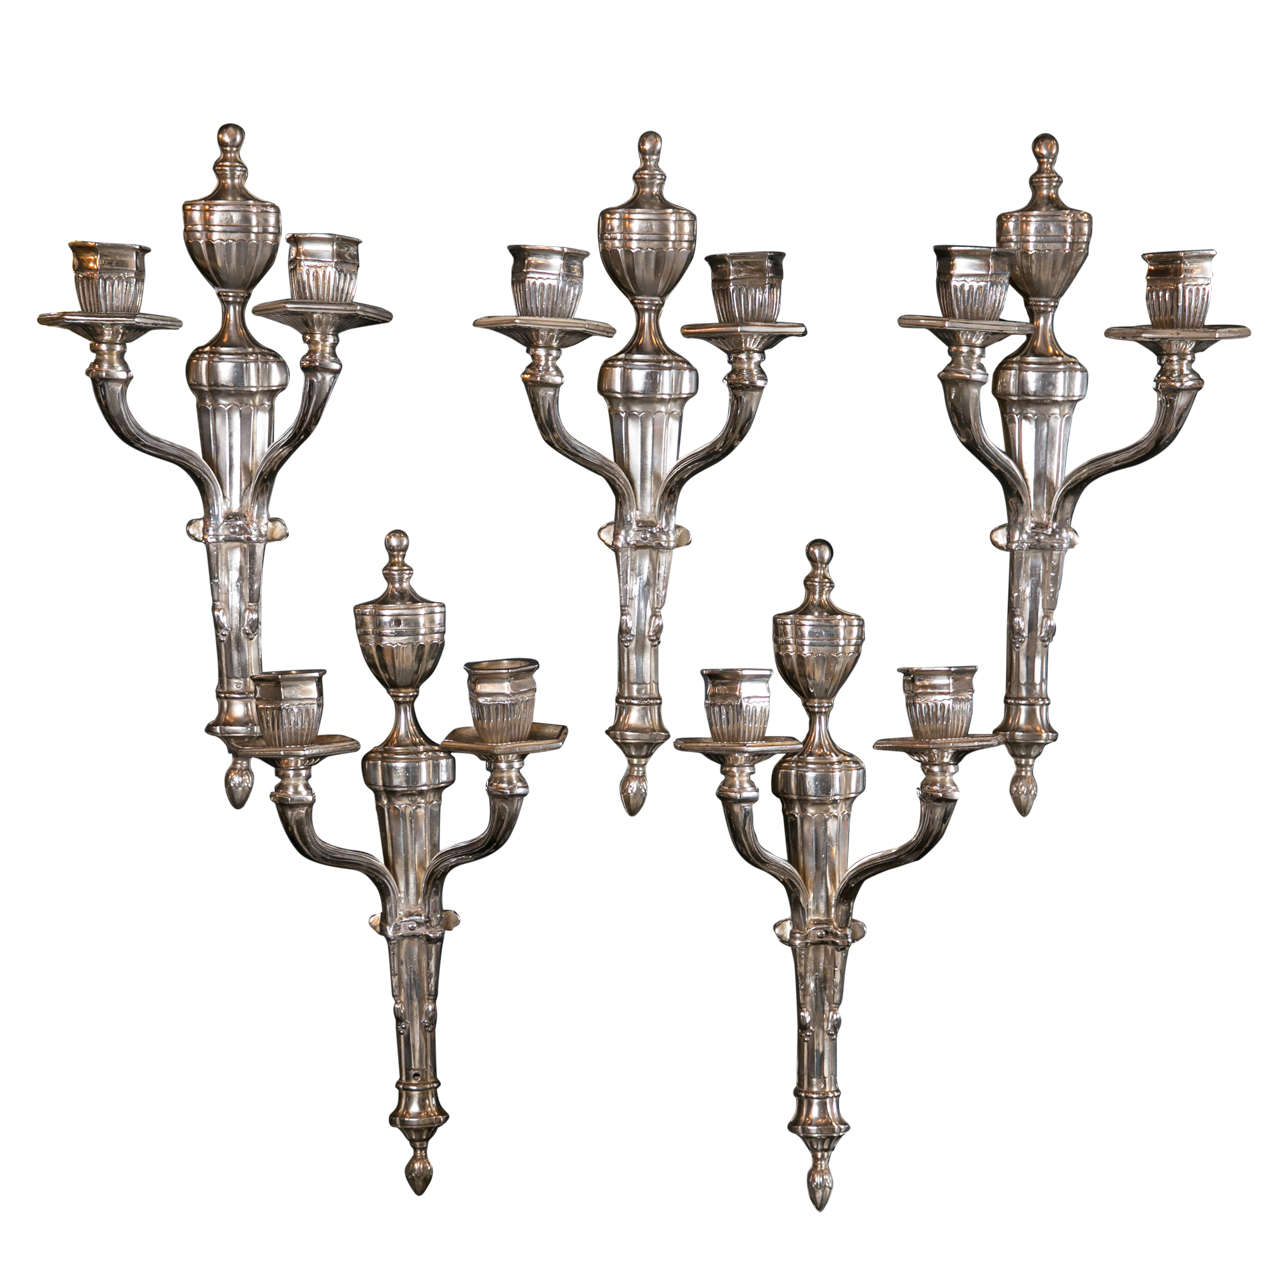 Pair of Neoclassical Style Caldwell Sconces For Sale